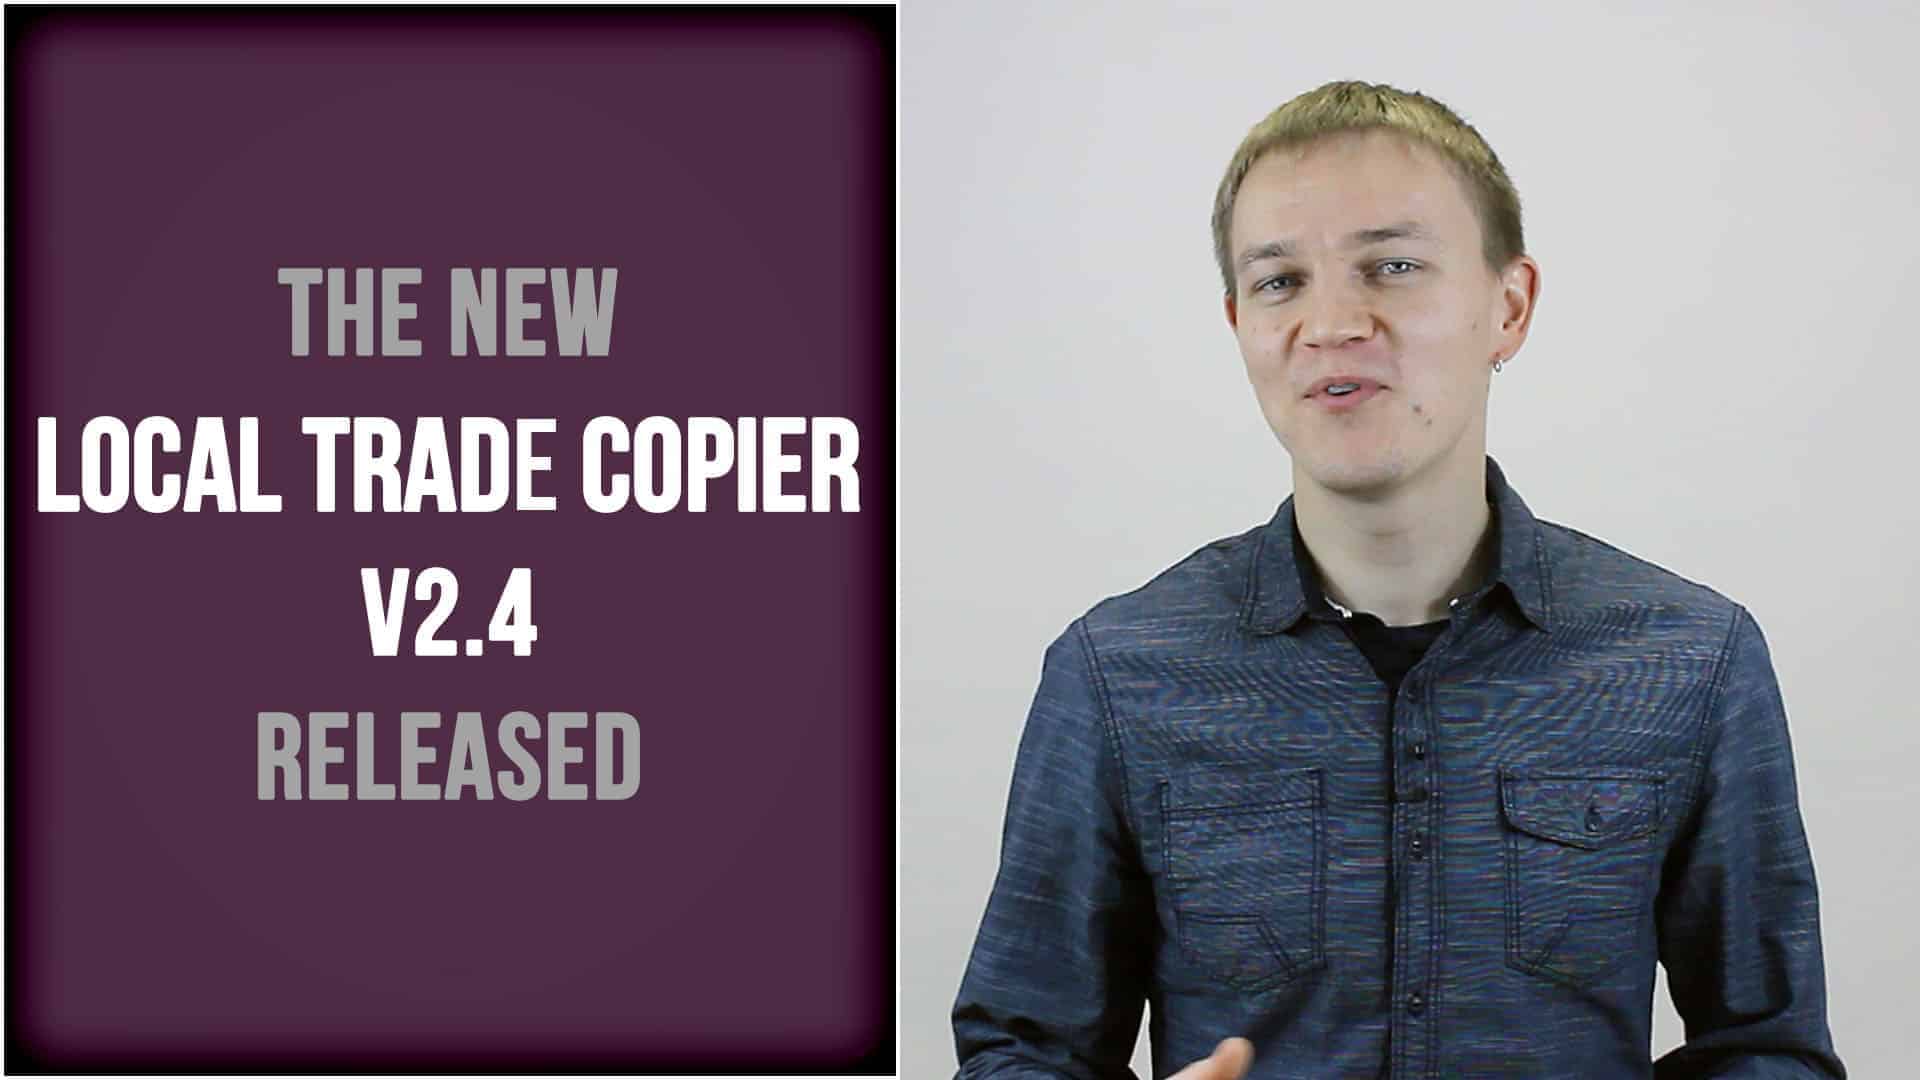 Local Trade Copier v2.5 is released!